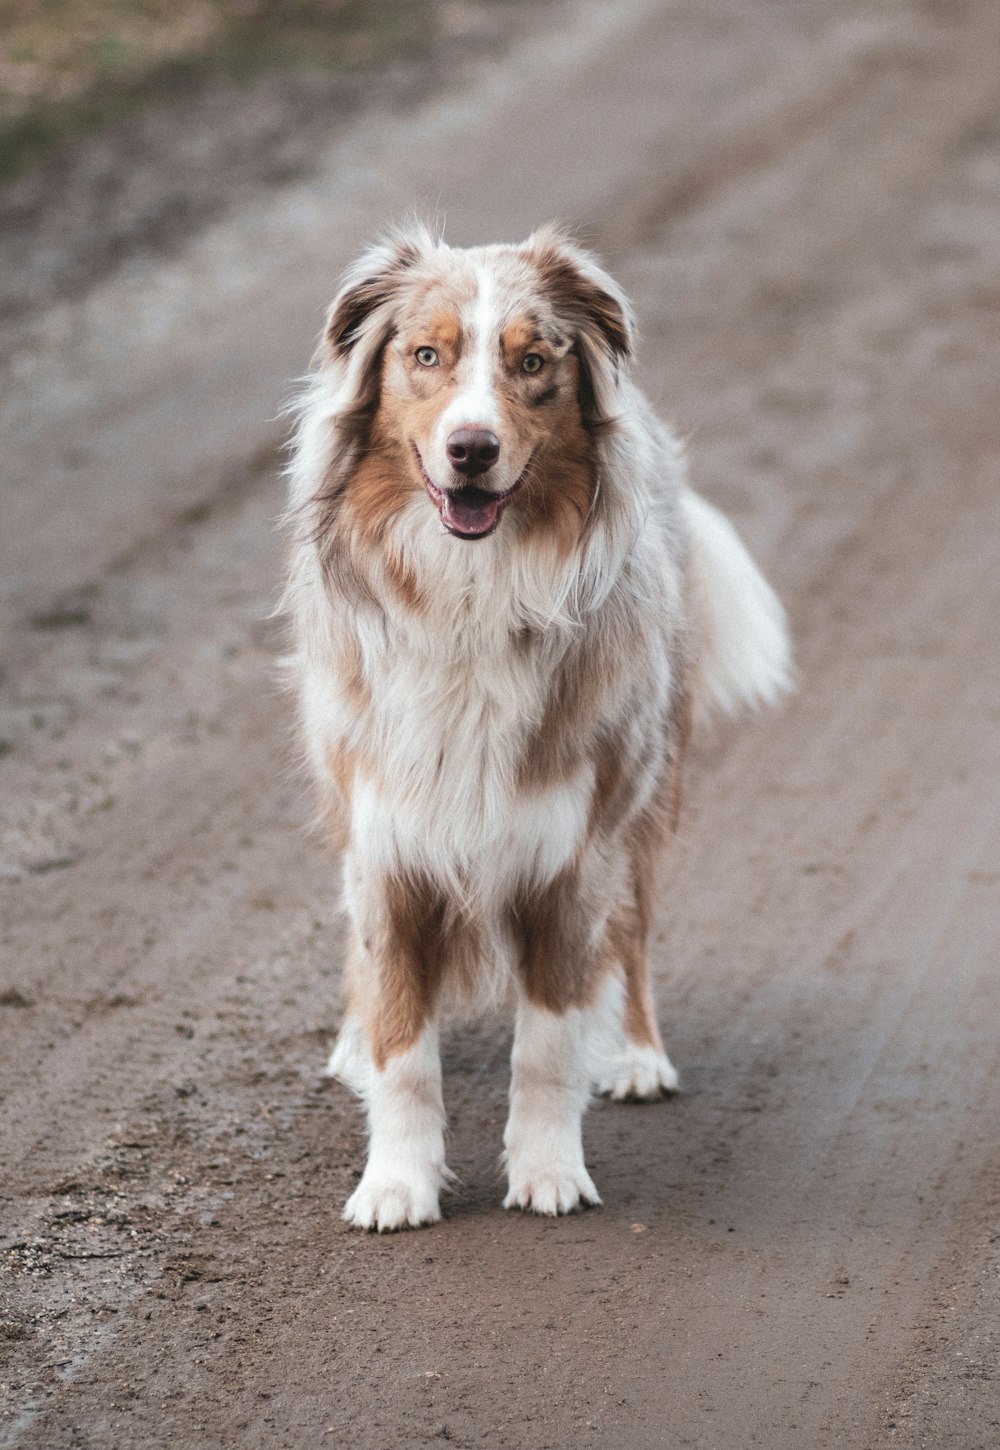 white and brown dog standing on road photo – Free Animal Image on Unsplash